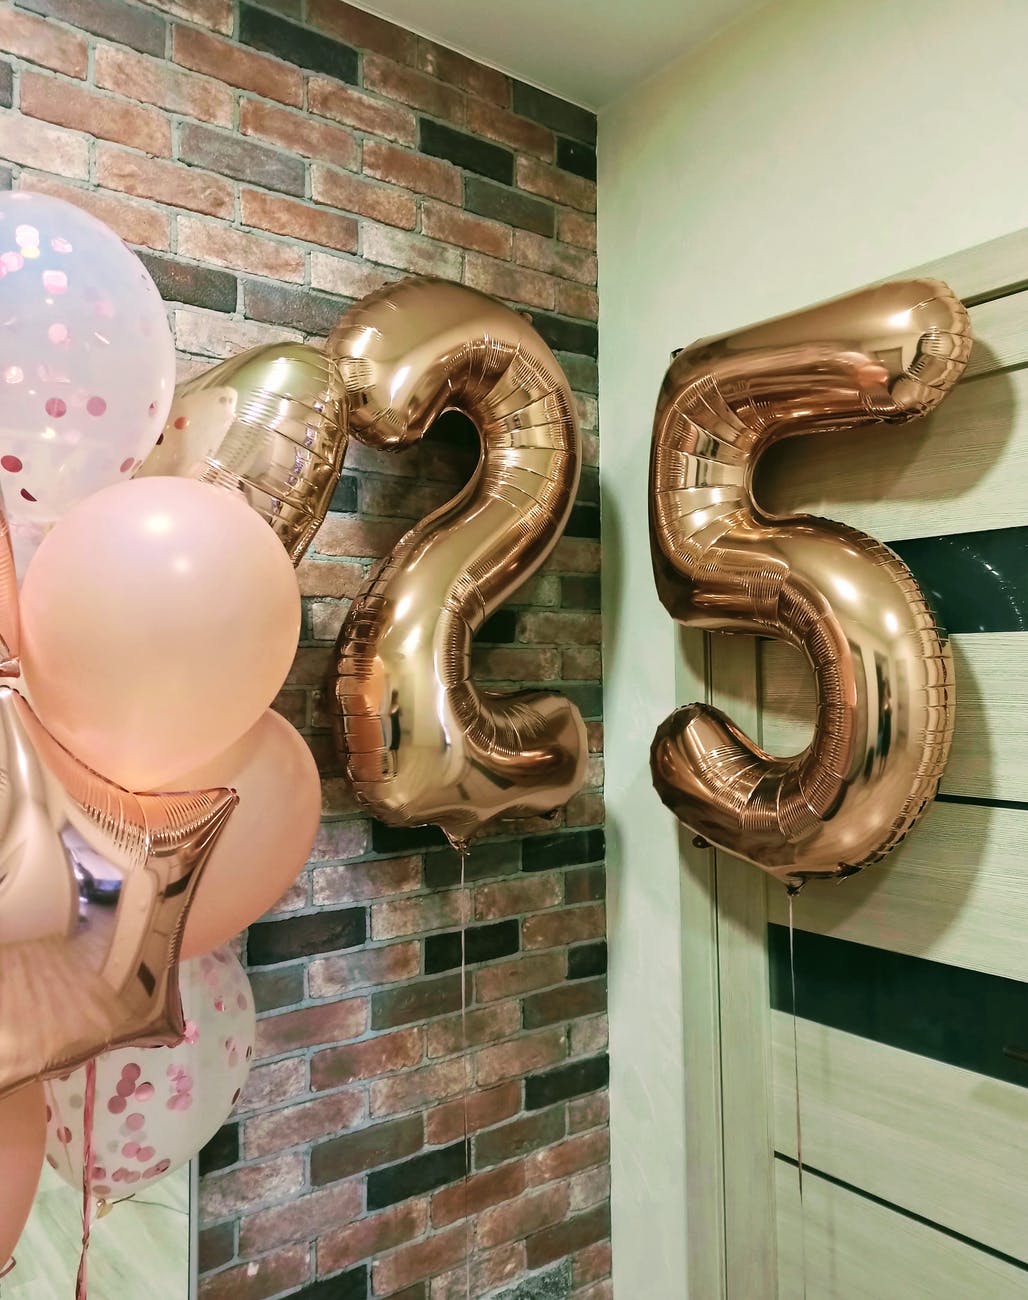 number shaped balloons